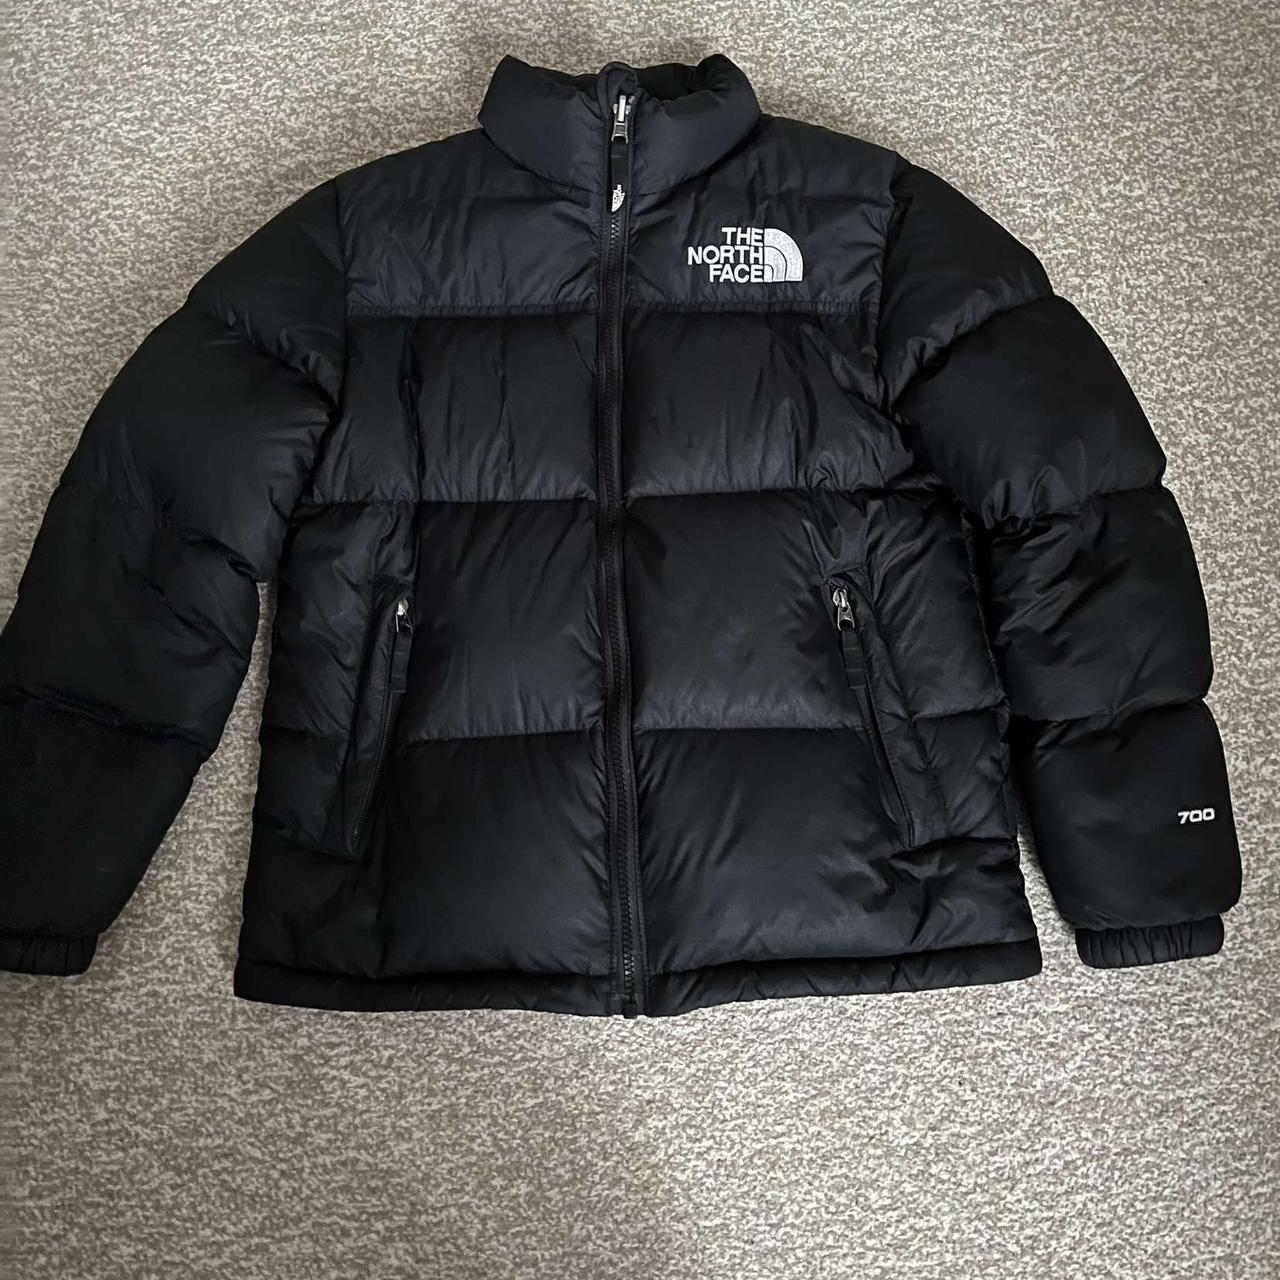 Black north face puffer. Kids size L so would fit... - Depop